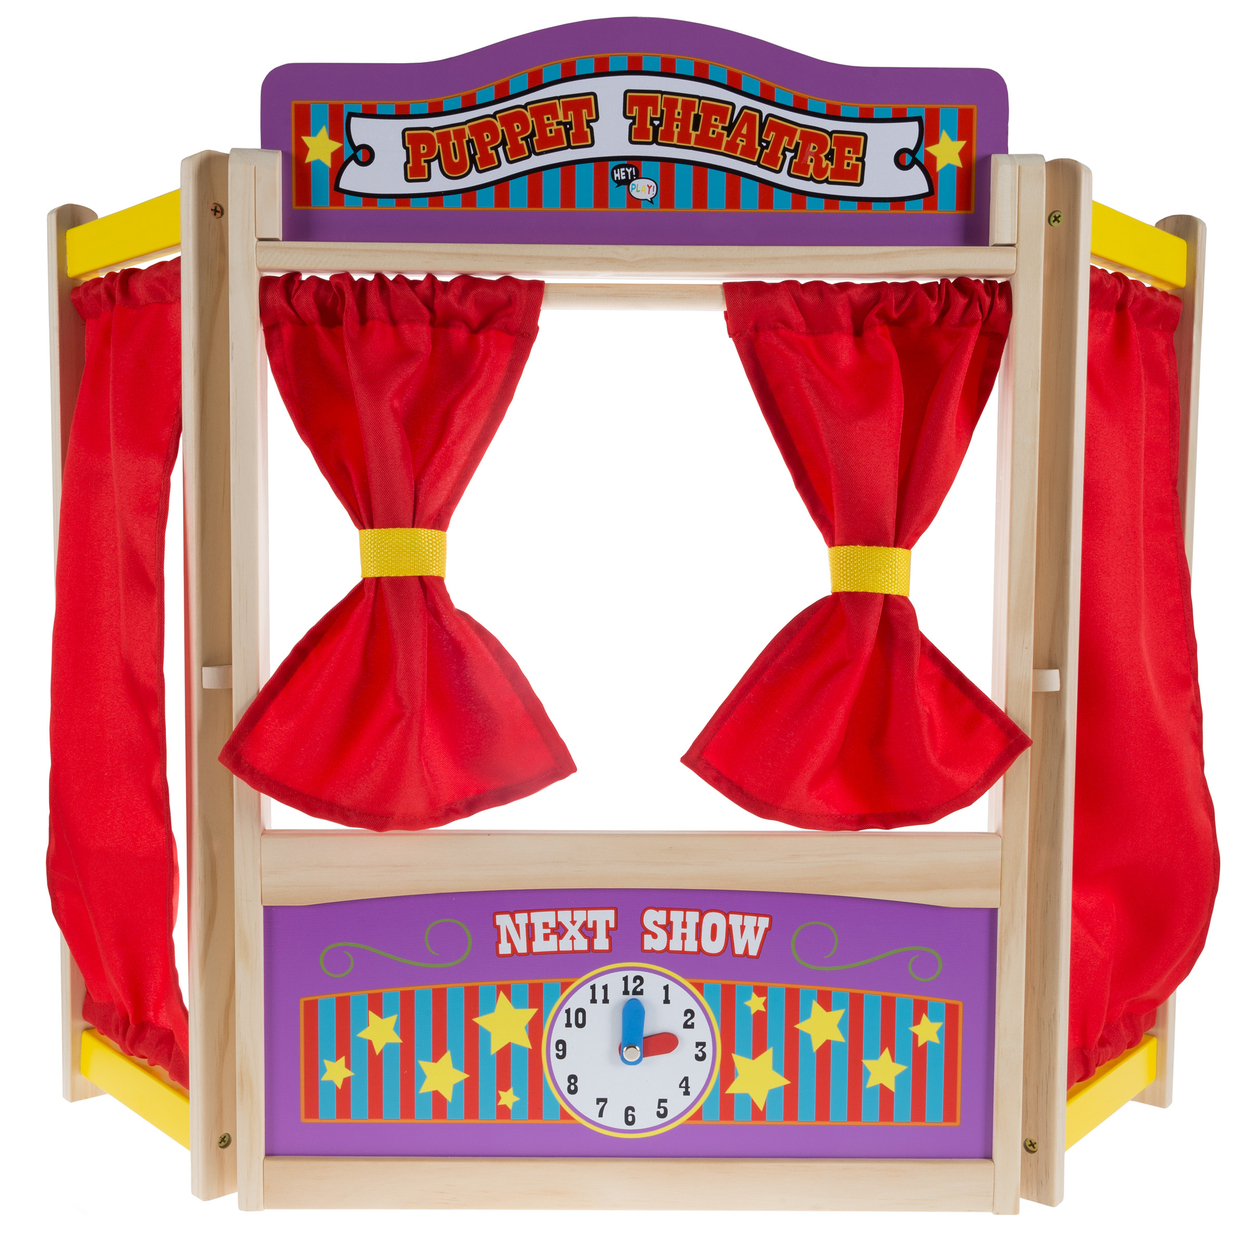 Wooden Puppet Theater Stage Show For Kids Pretend Play Imagination Creativity